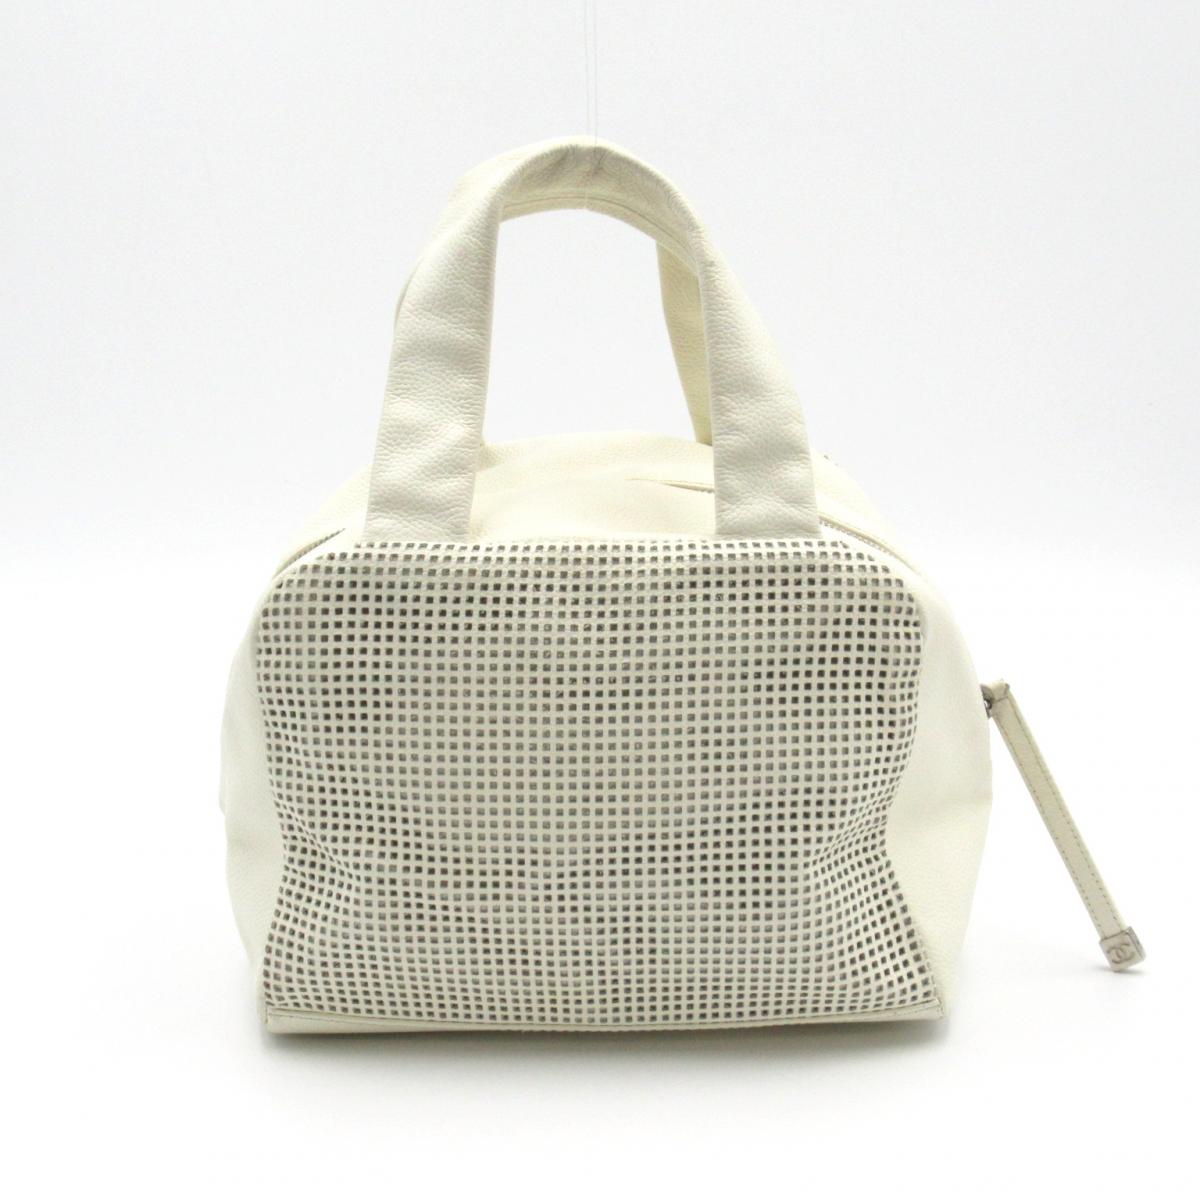 CC Perforated Leather Bowler Bag